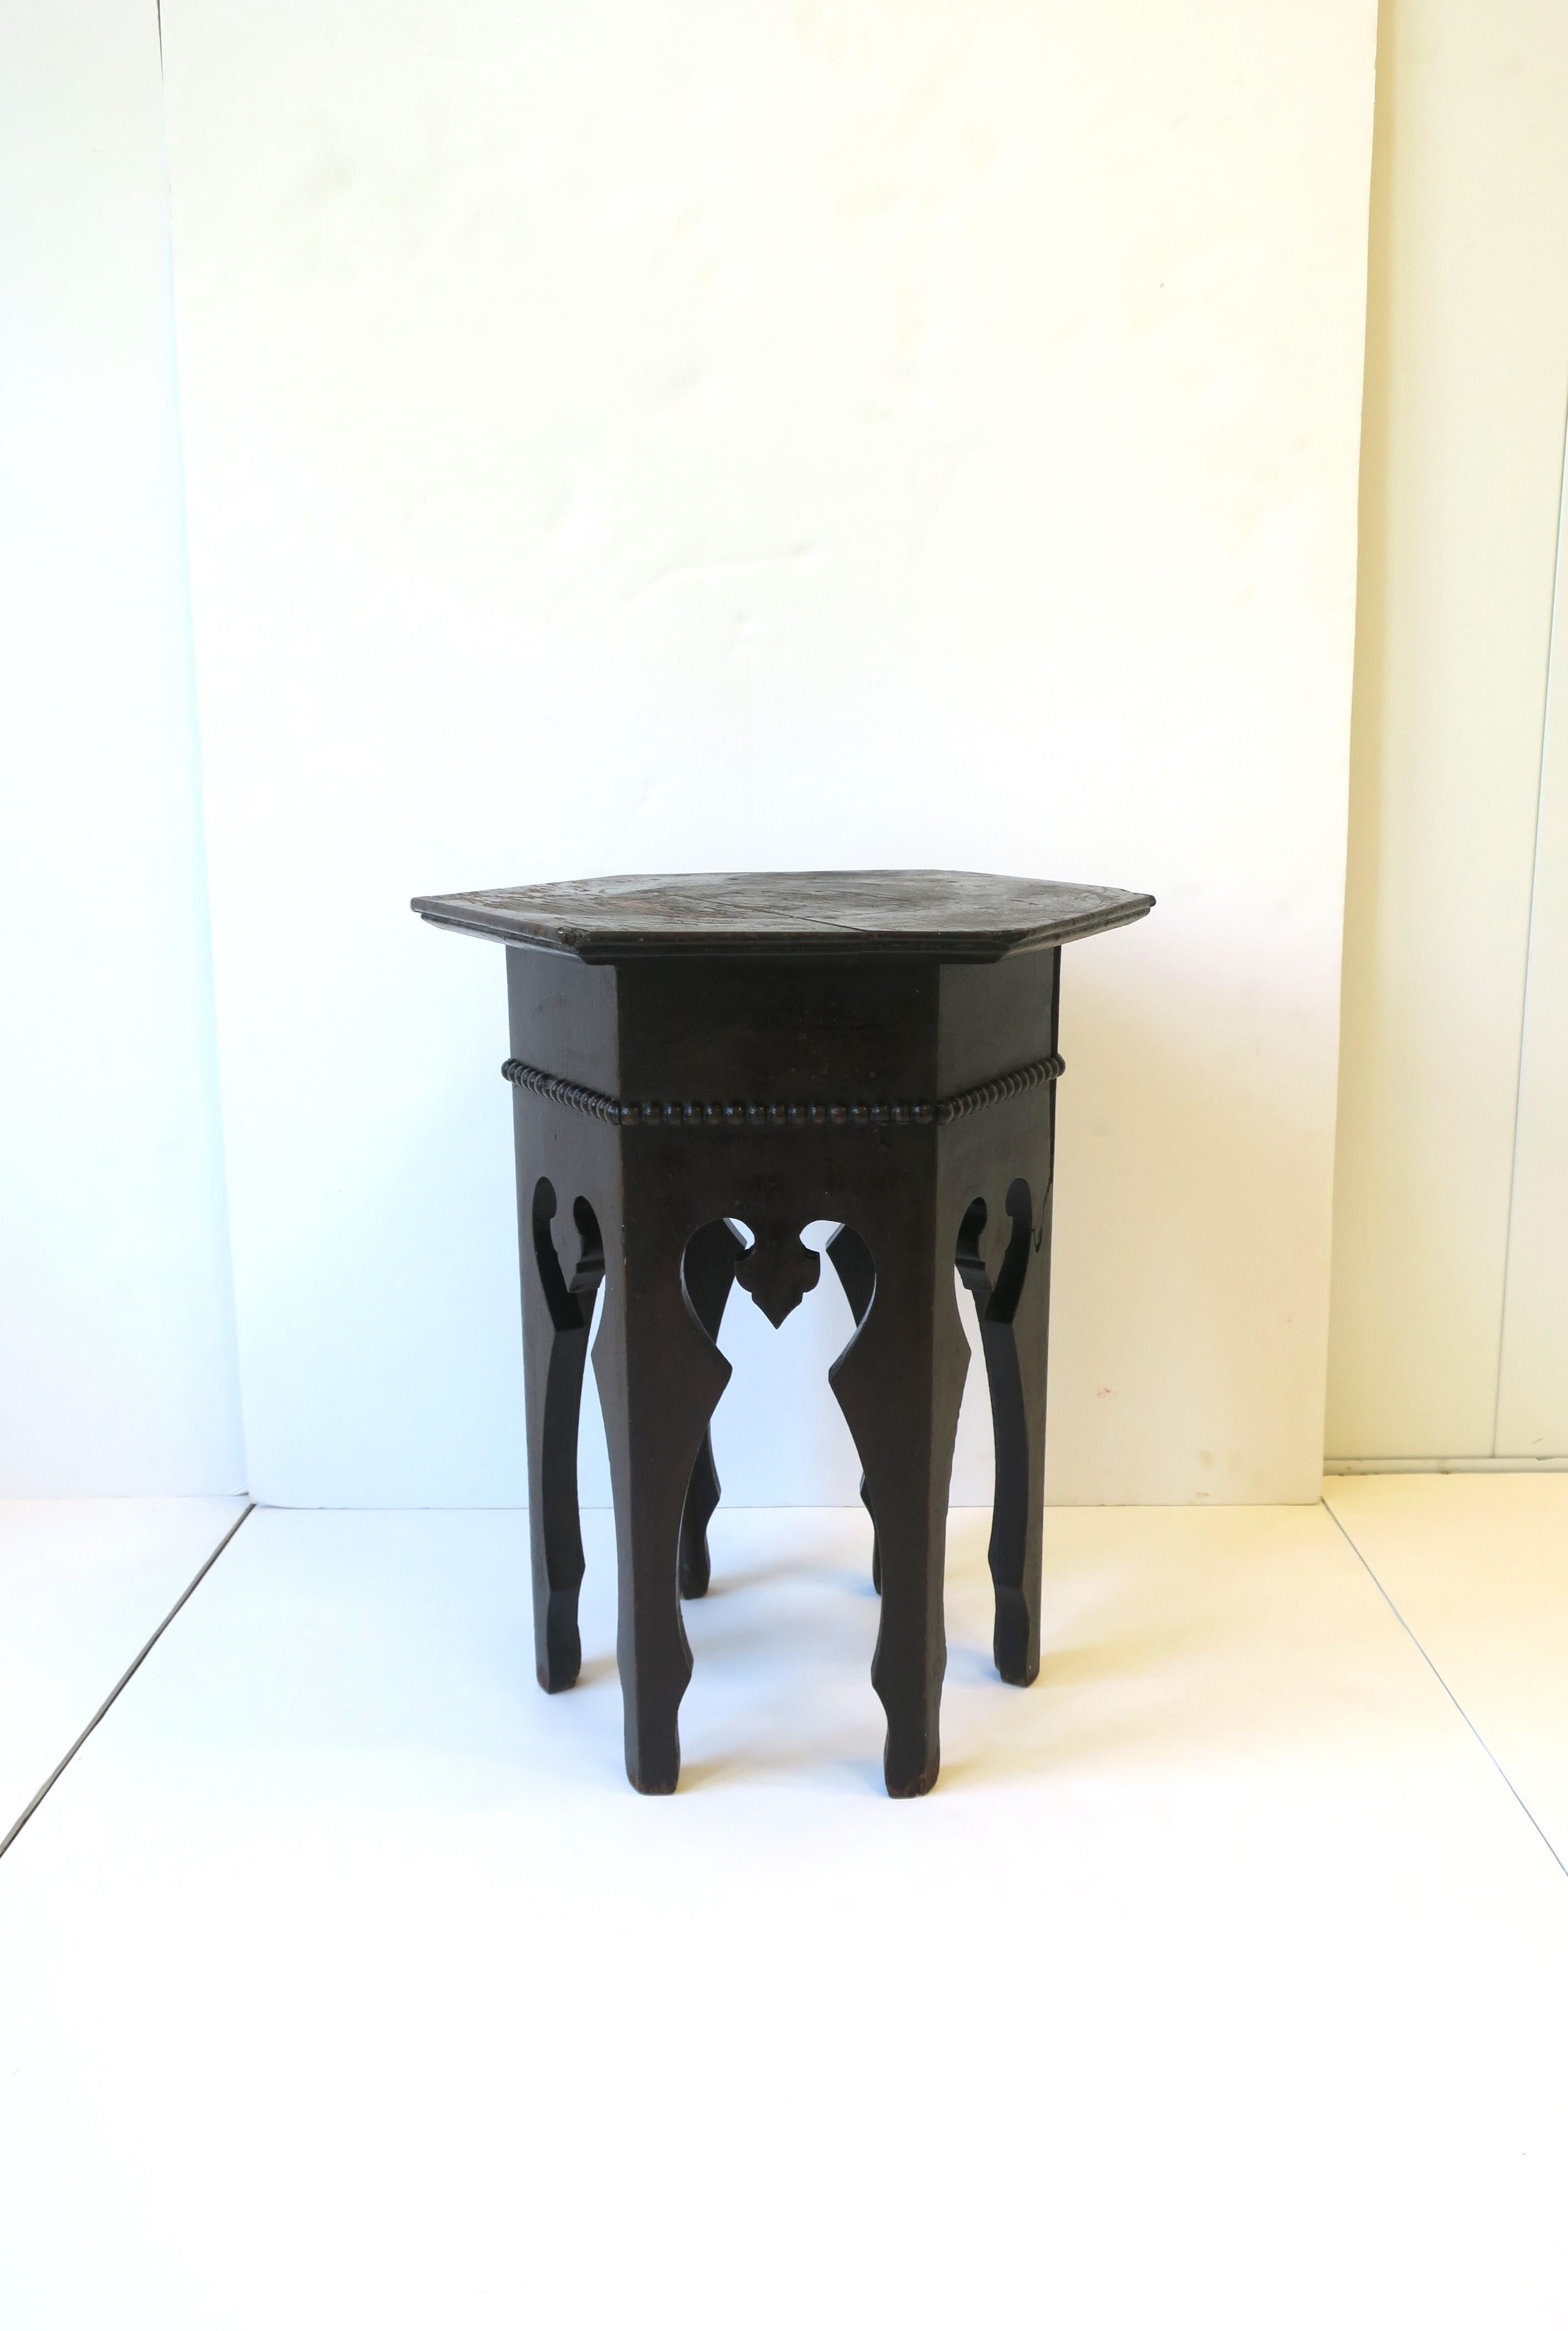 A dark rich brown Moroccan tabouret drinks or side table with traditional Moorish design, circa early-20th century, Morocco. This wood table is hand-painted in a rich dark brown hue and has a round hexagon top and base. Dimensions: 13.63